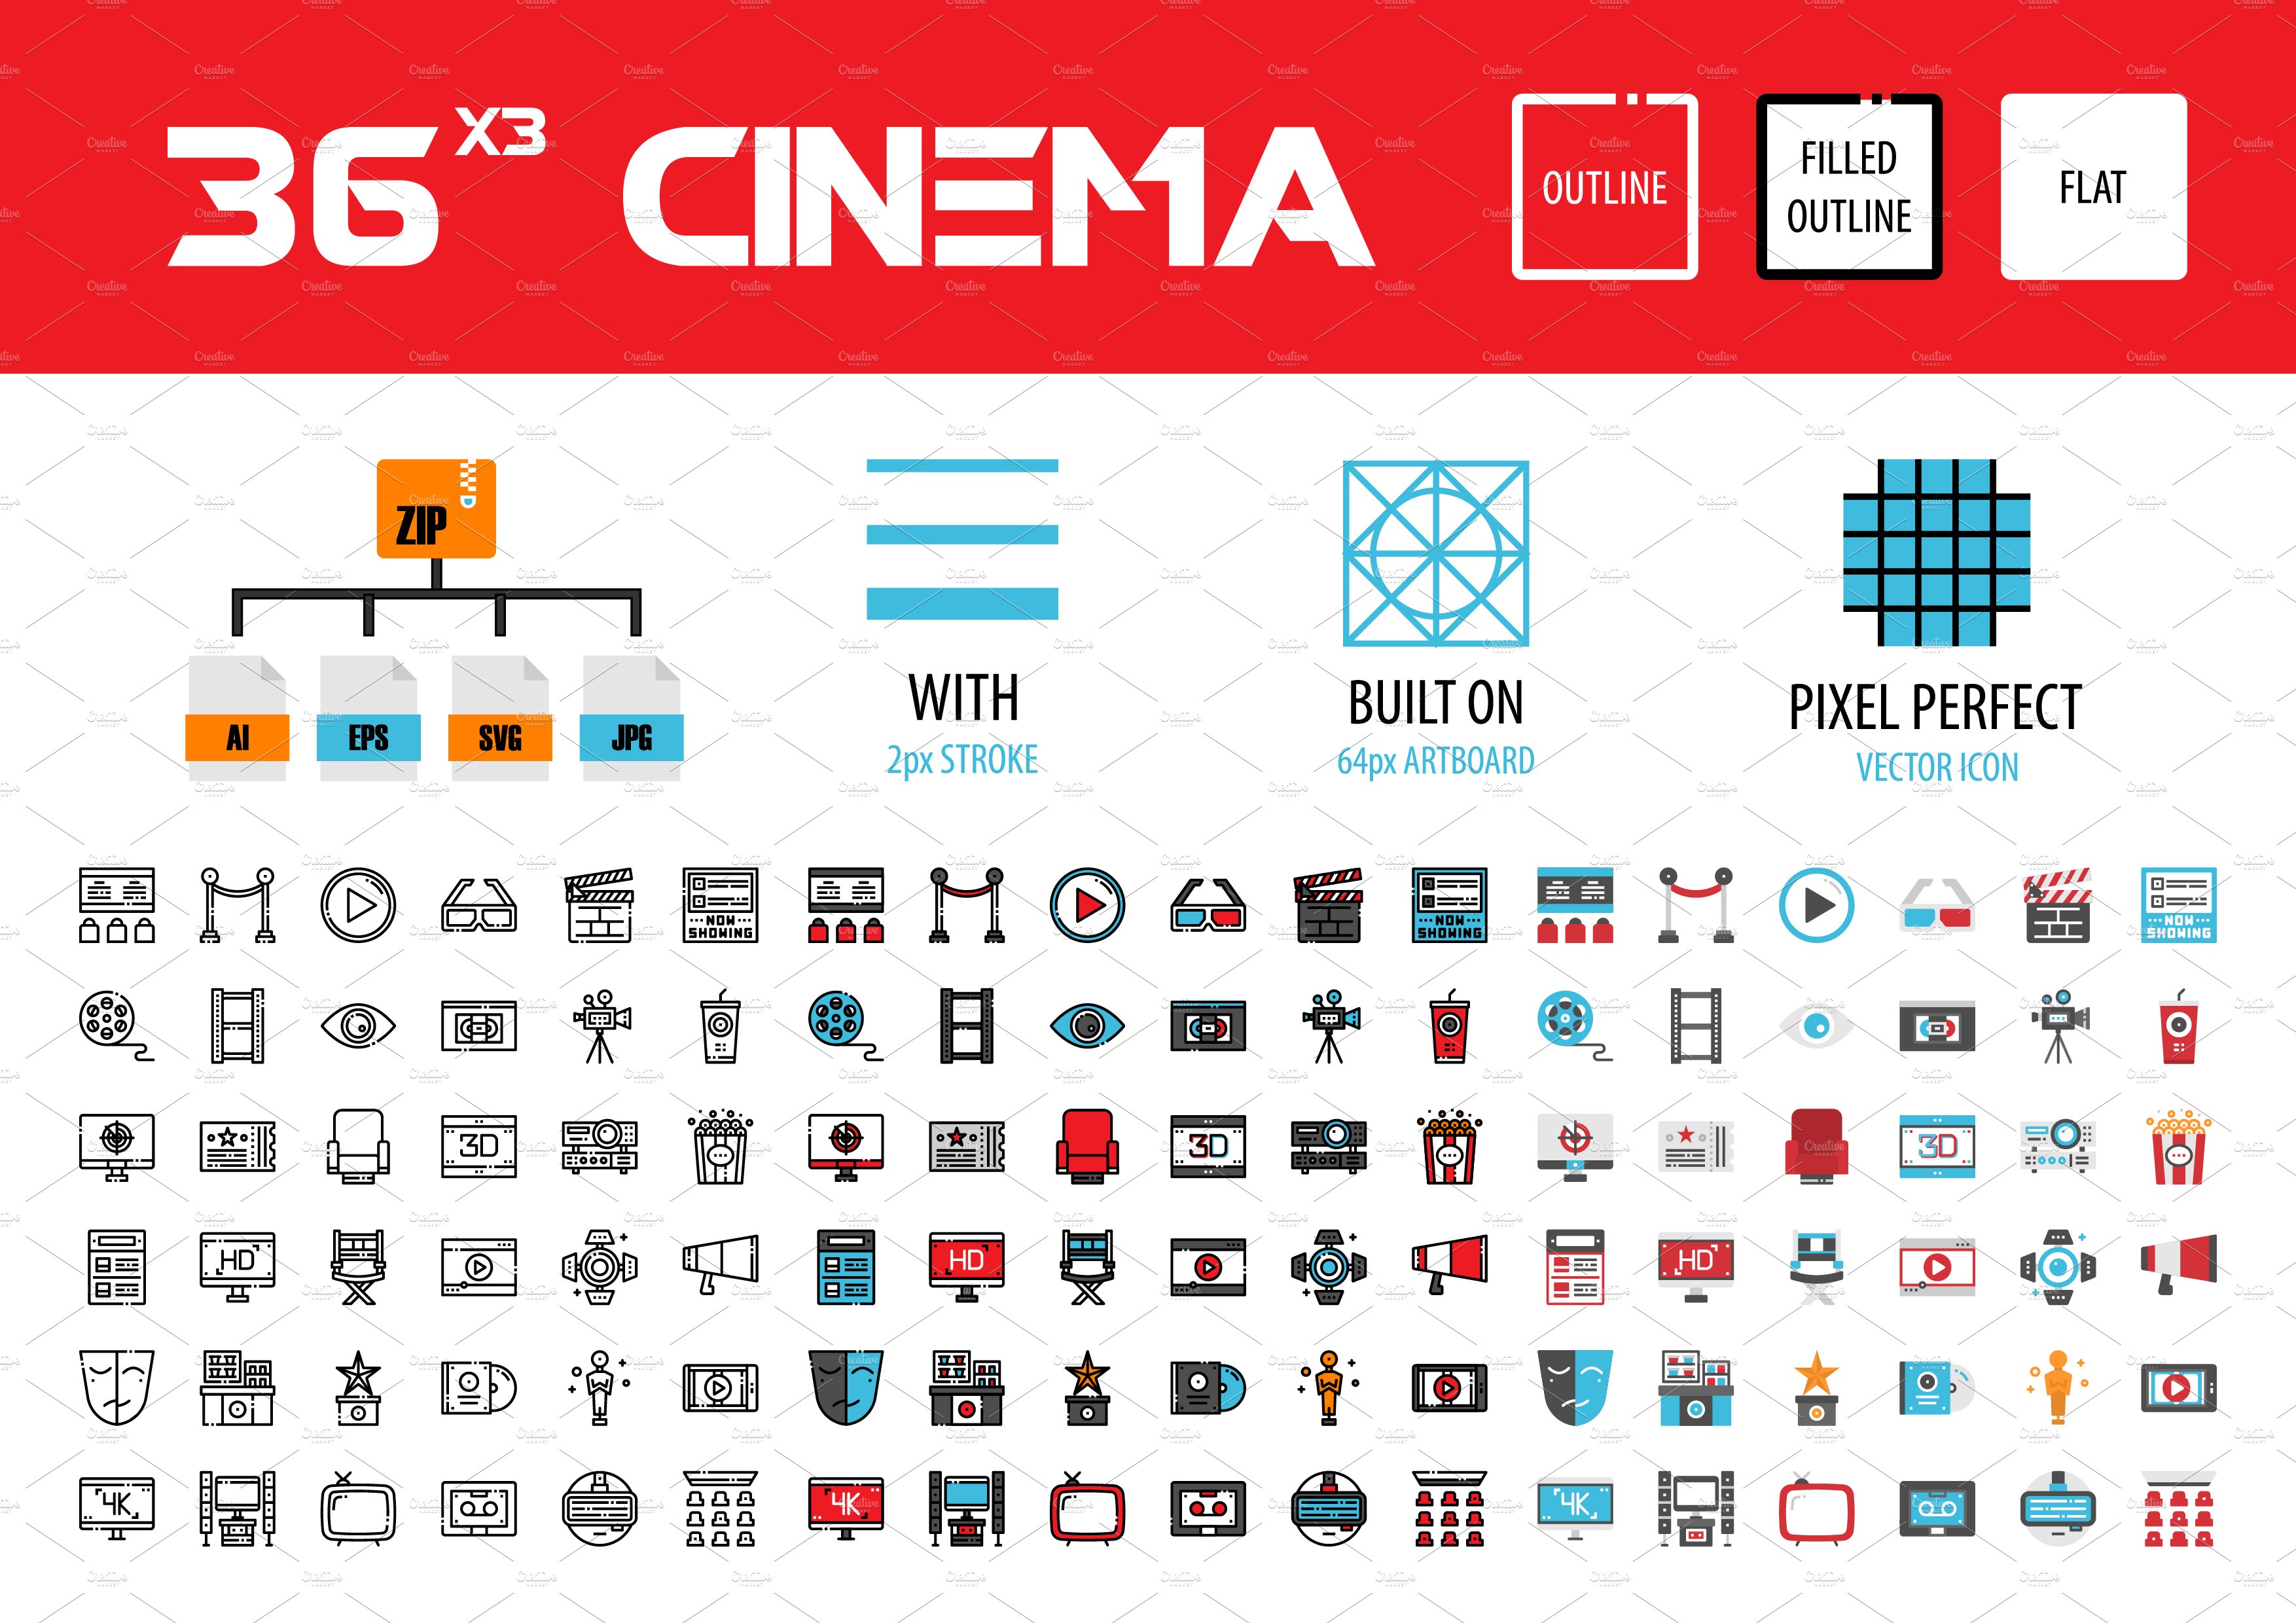 36x3 Cinema icons preview image.